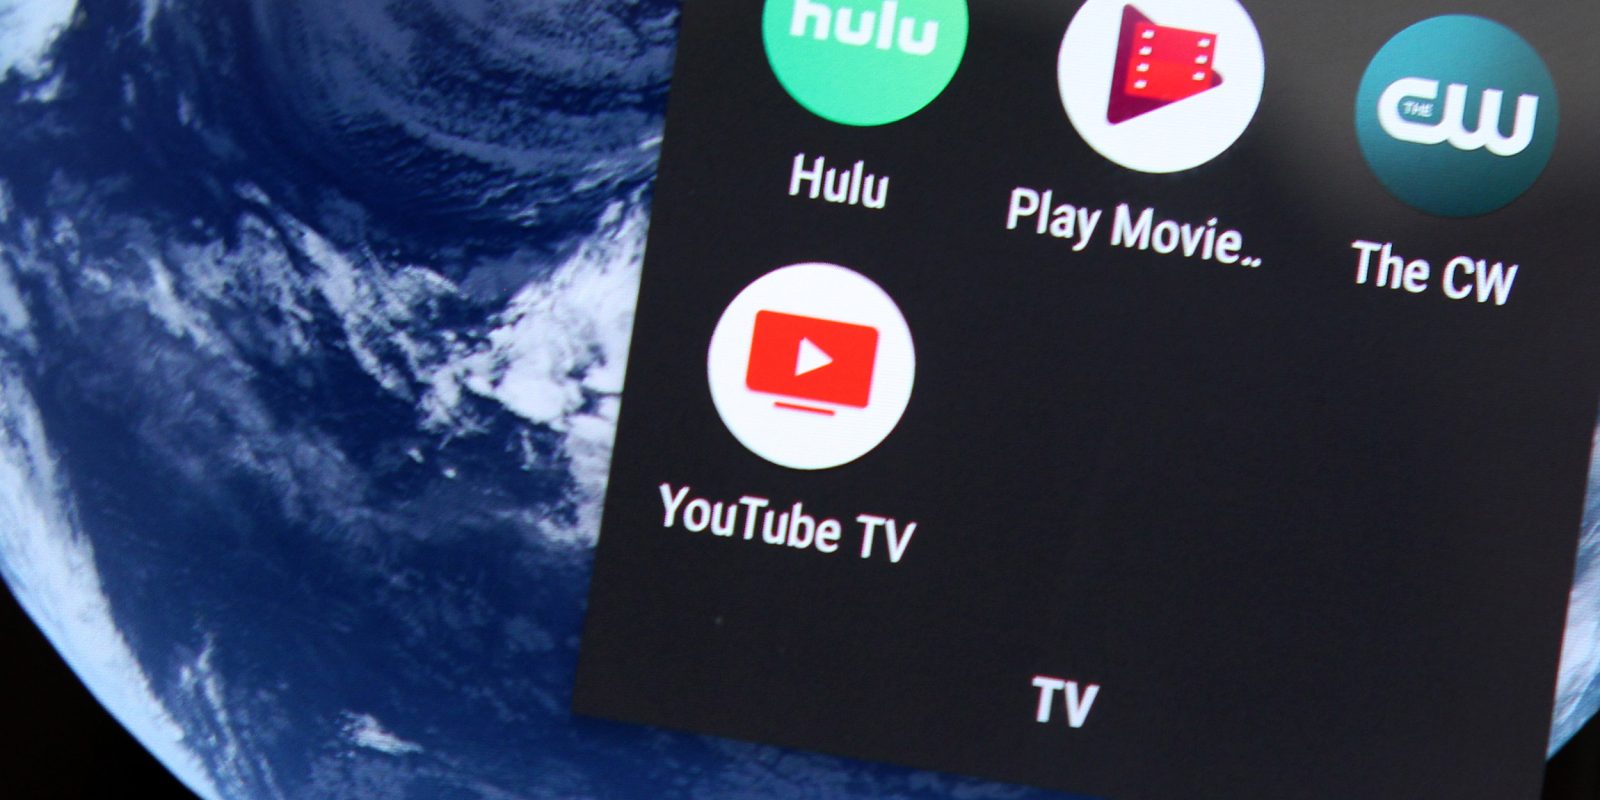 YouTube TV offers extended twoweek trial for a limited period Chrome